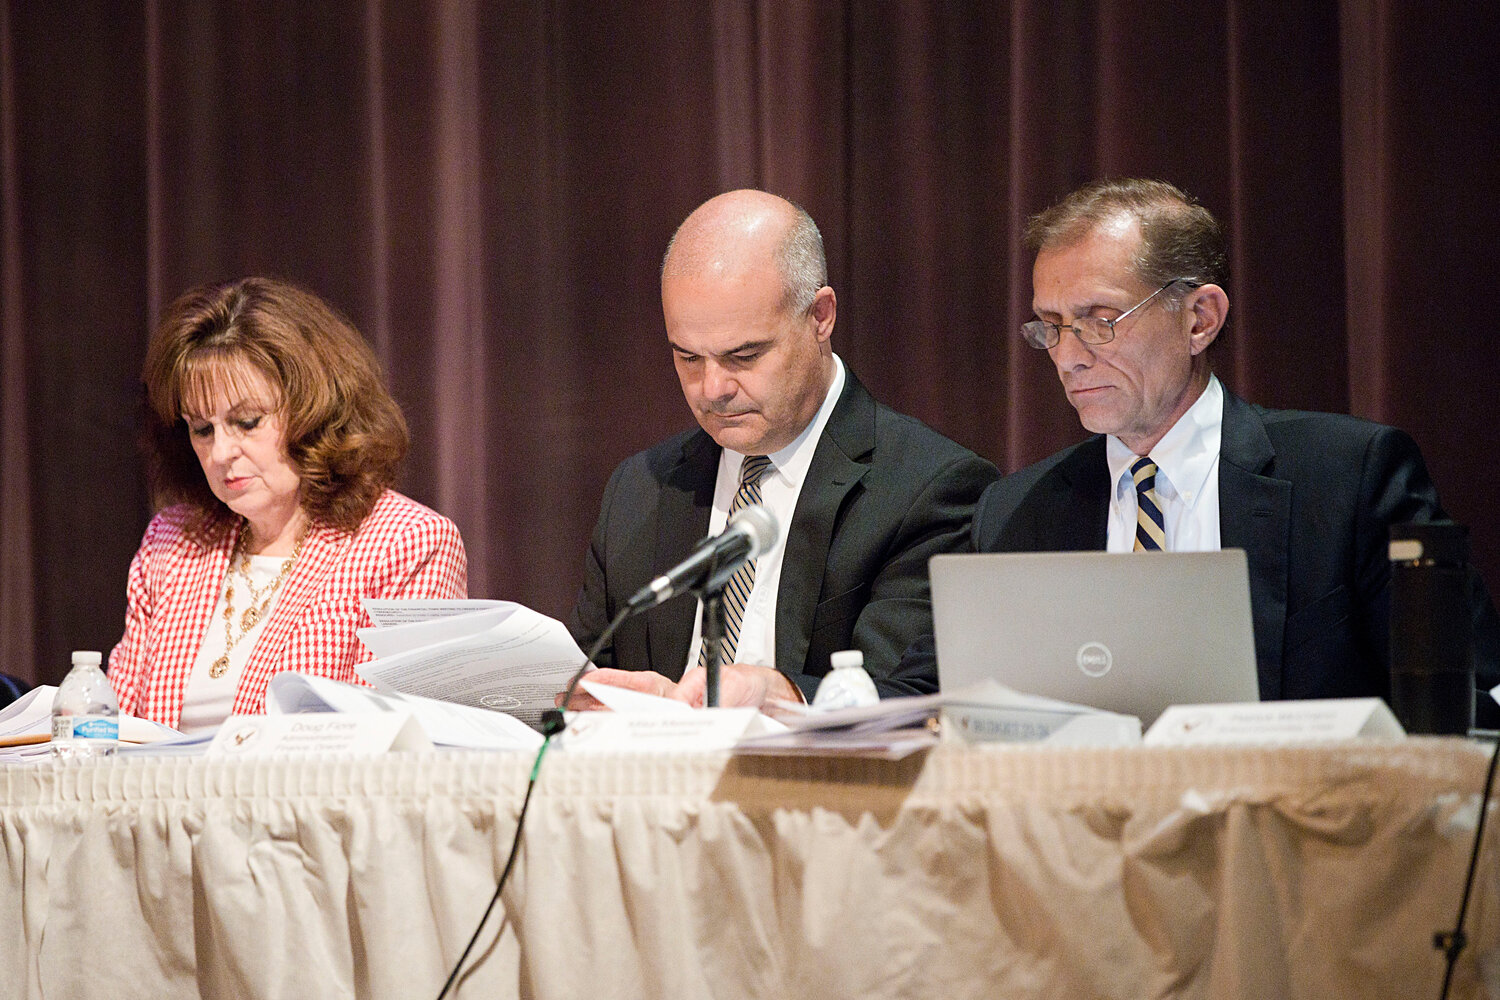 Barrington Schools Superintendent Michael Messore (right) sits beside BPS Director of Finance Doug Fiore (center) and Town Clerk Meredith DeSisto (left) at Wednesday night's FTM.